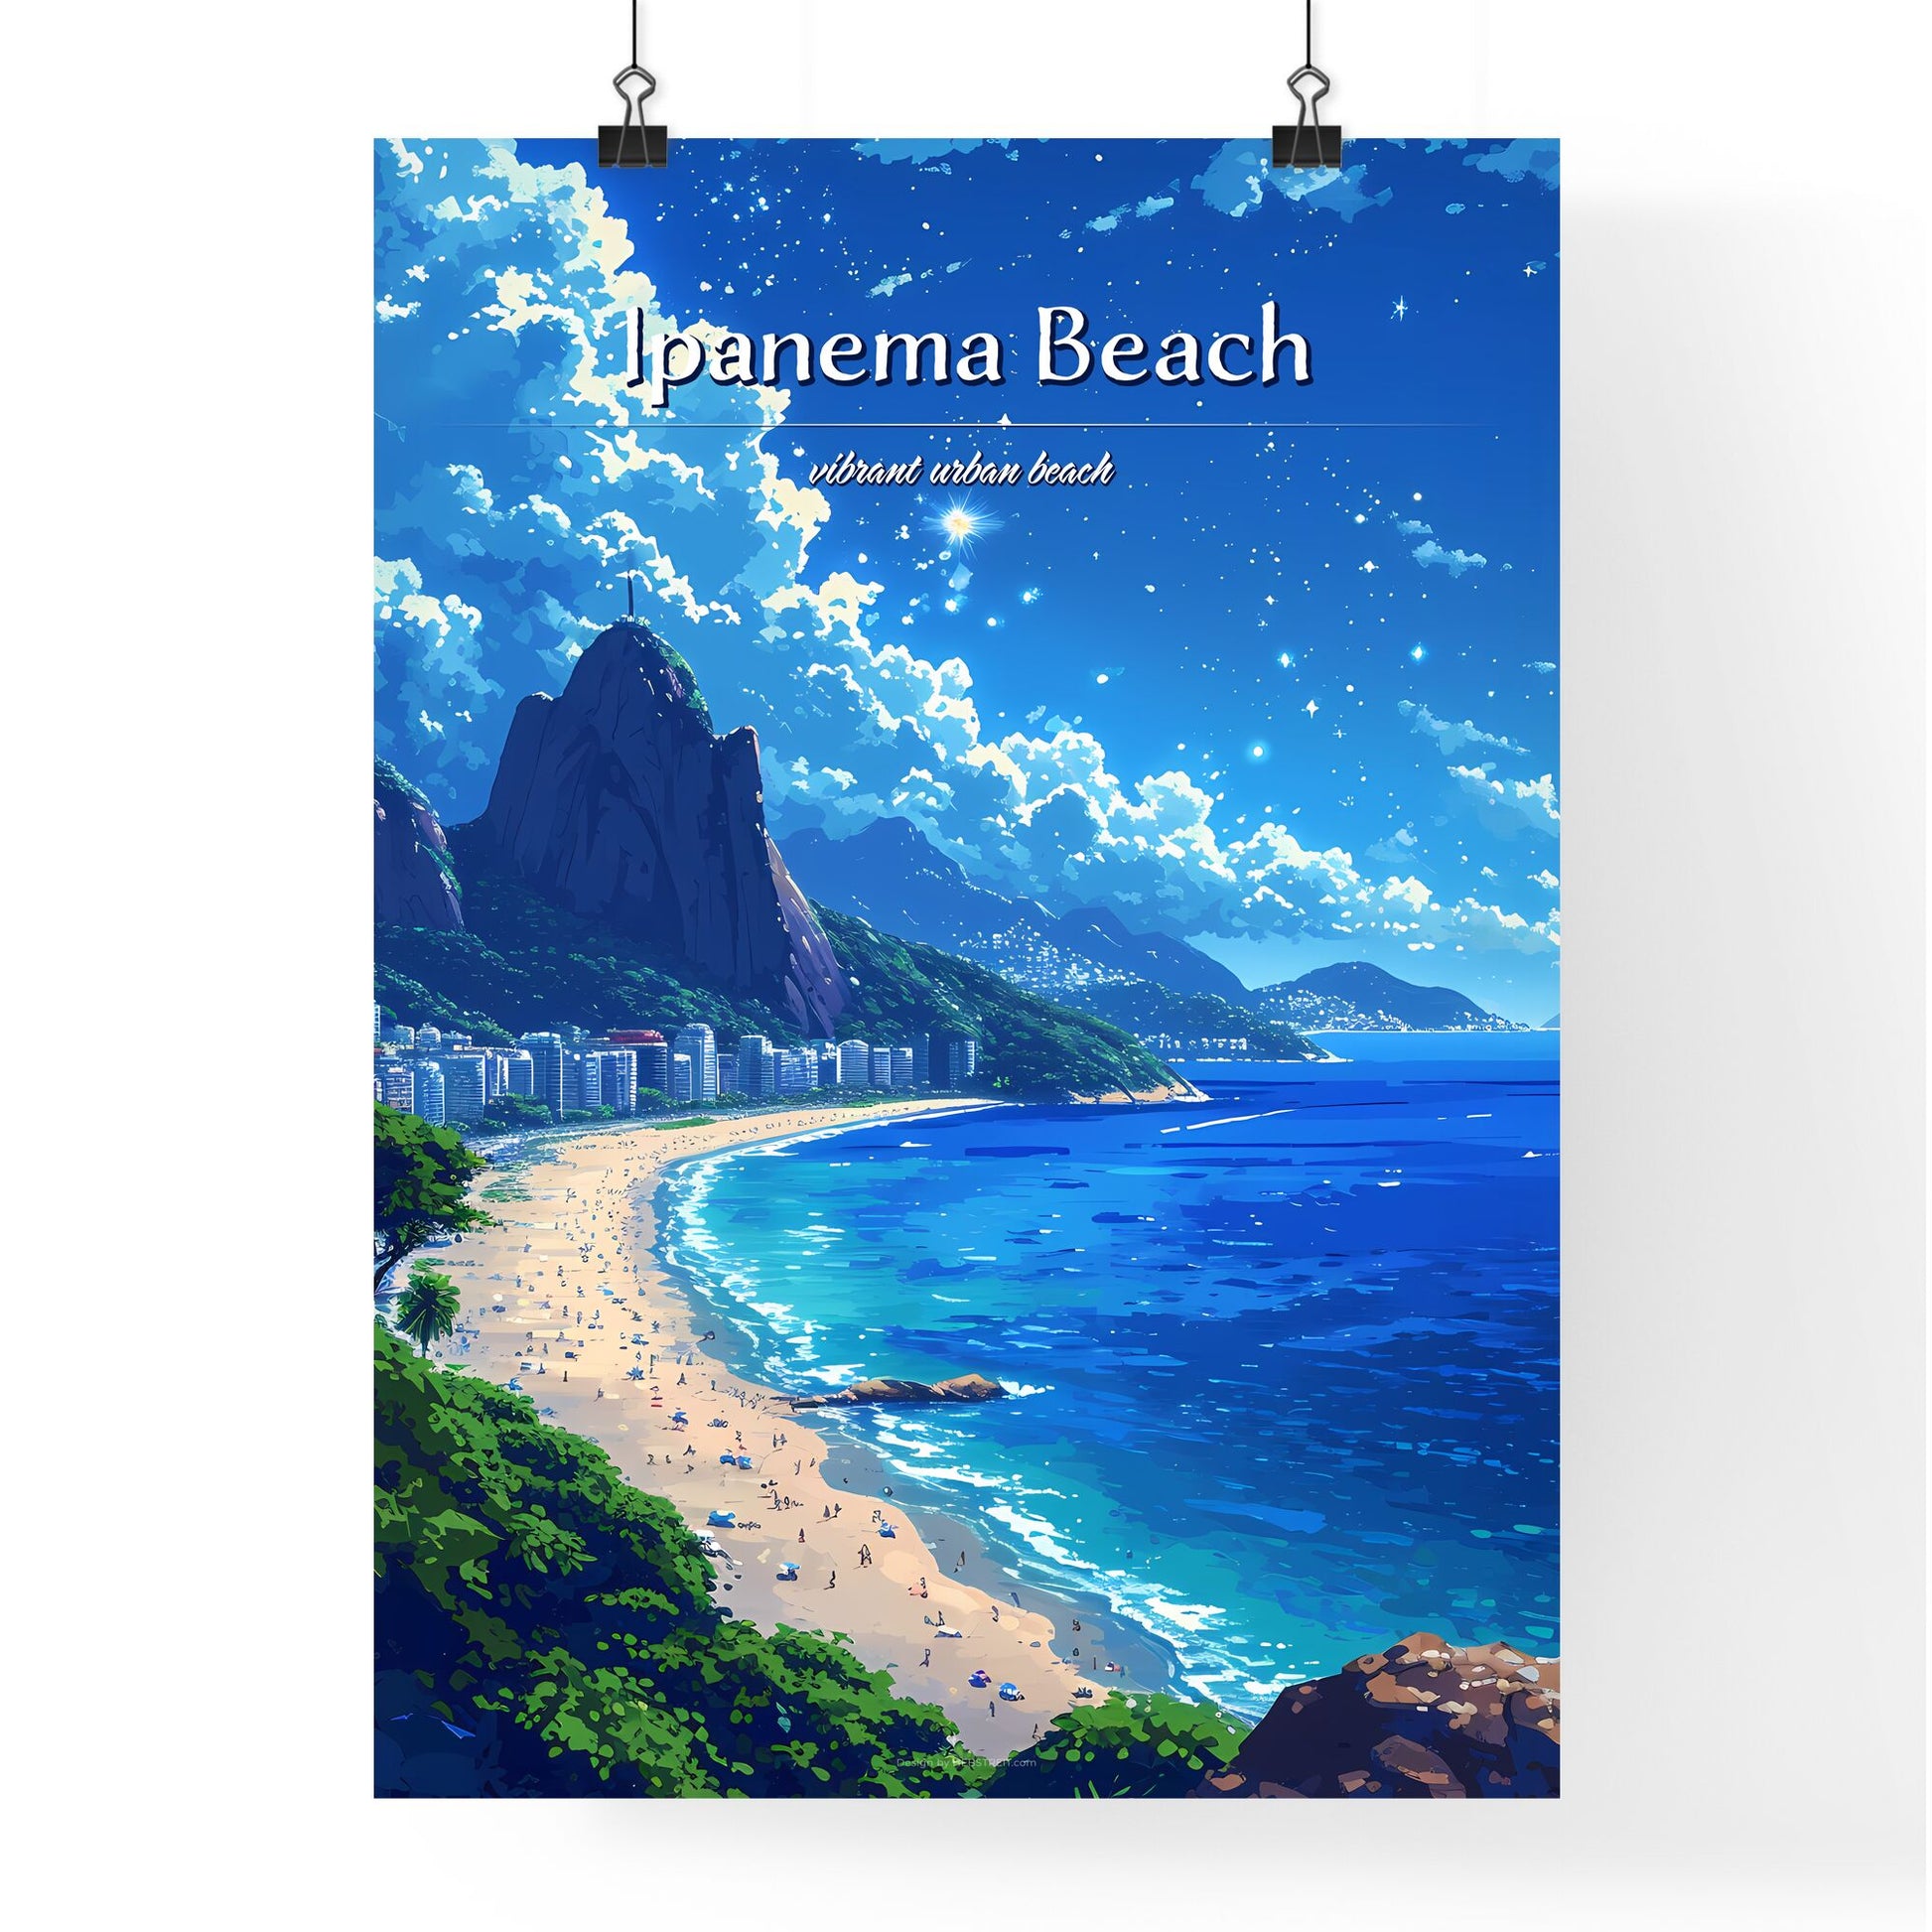 Ipanema Beach - Art print of a beach with buildings and mountains in the background Default Title